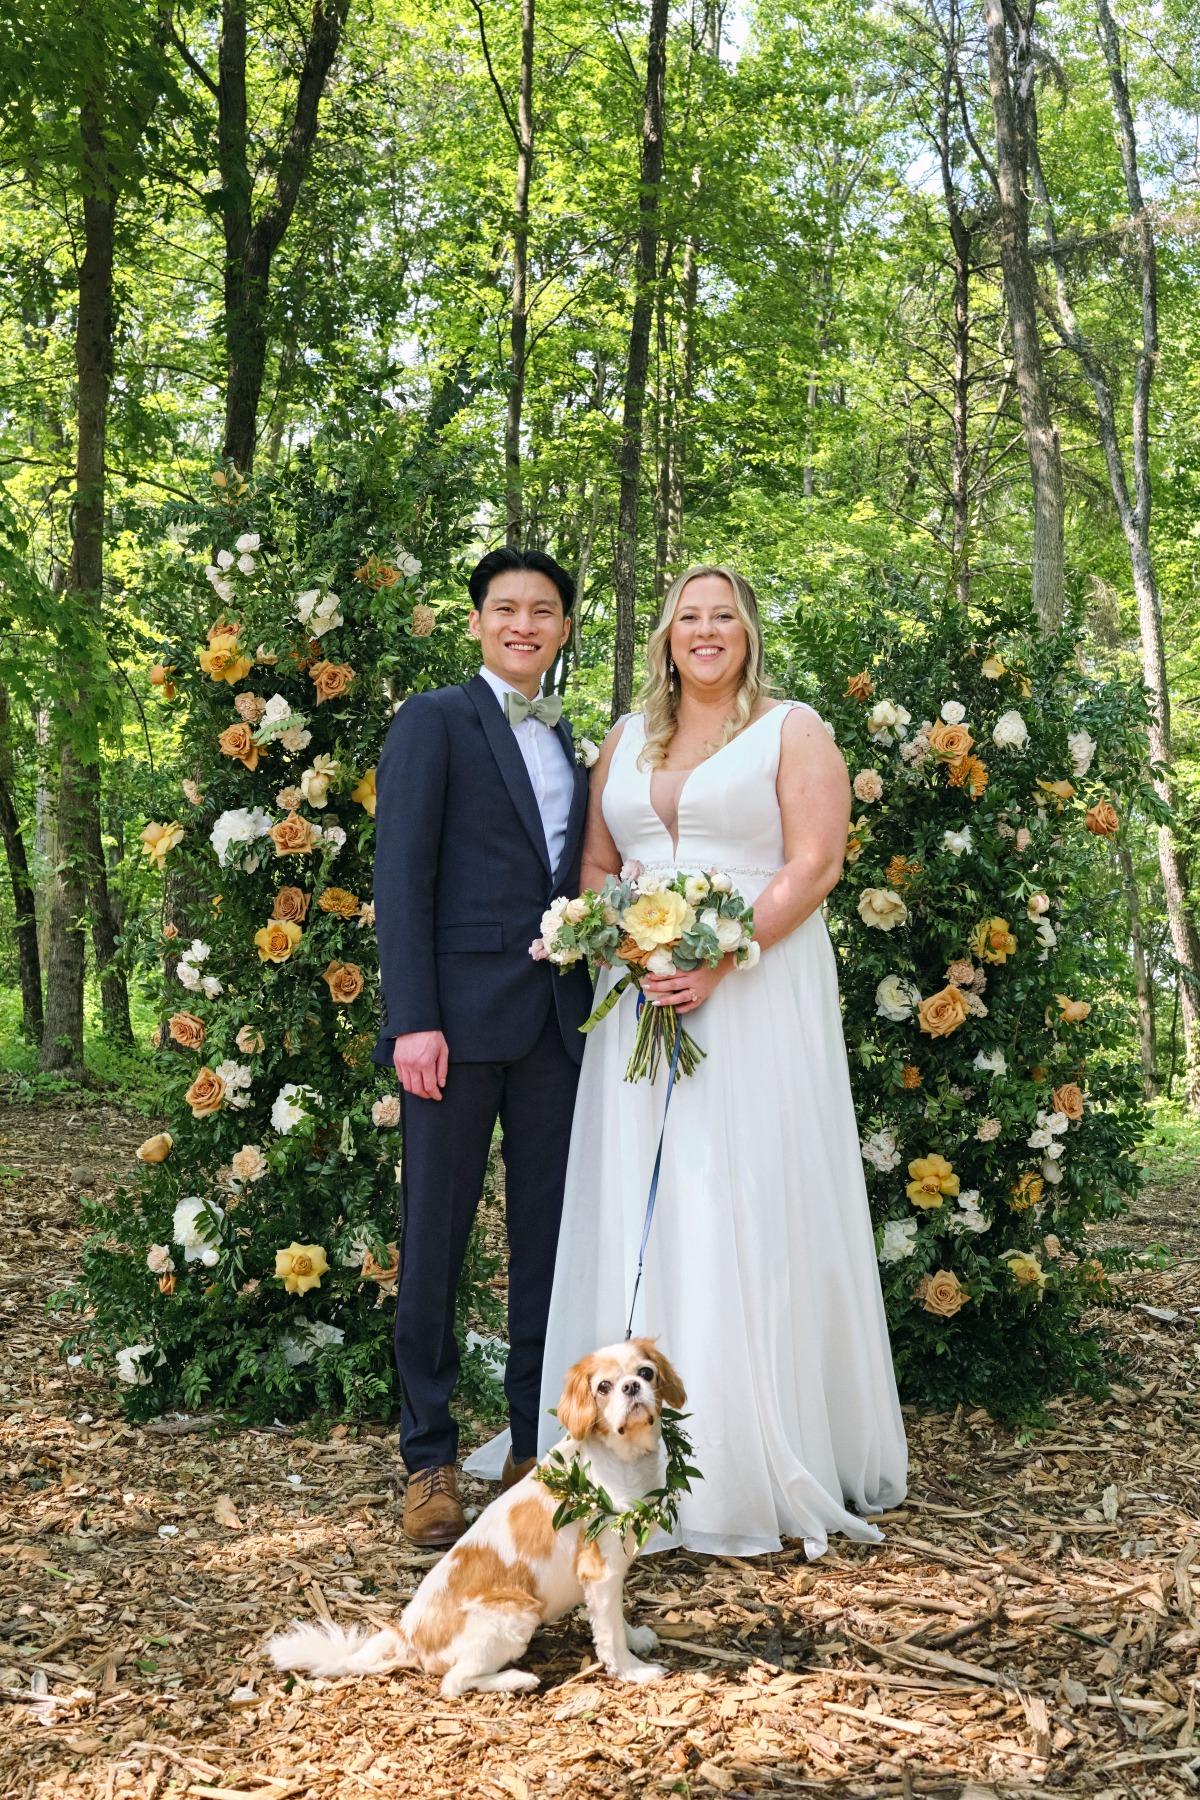 Romantic floral wedding in Hudson Valley with dog ring bearer